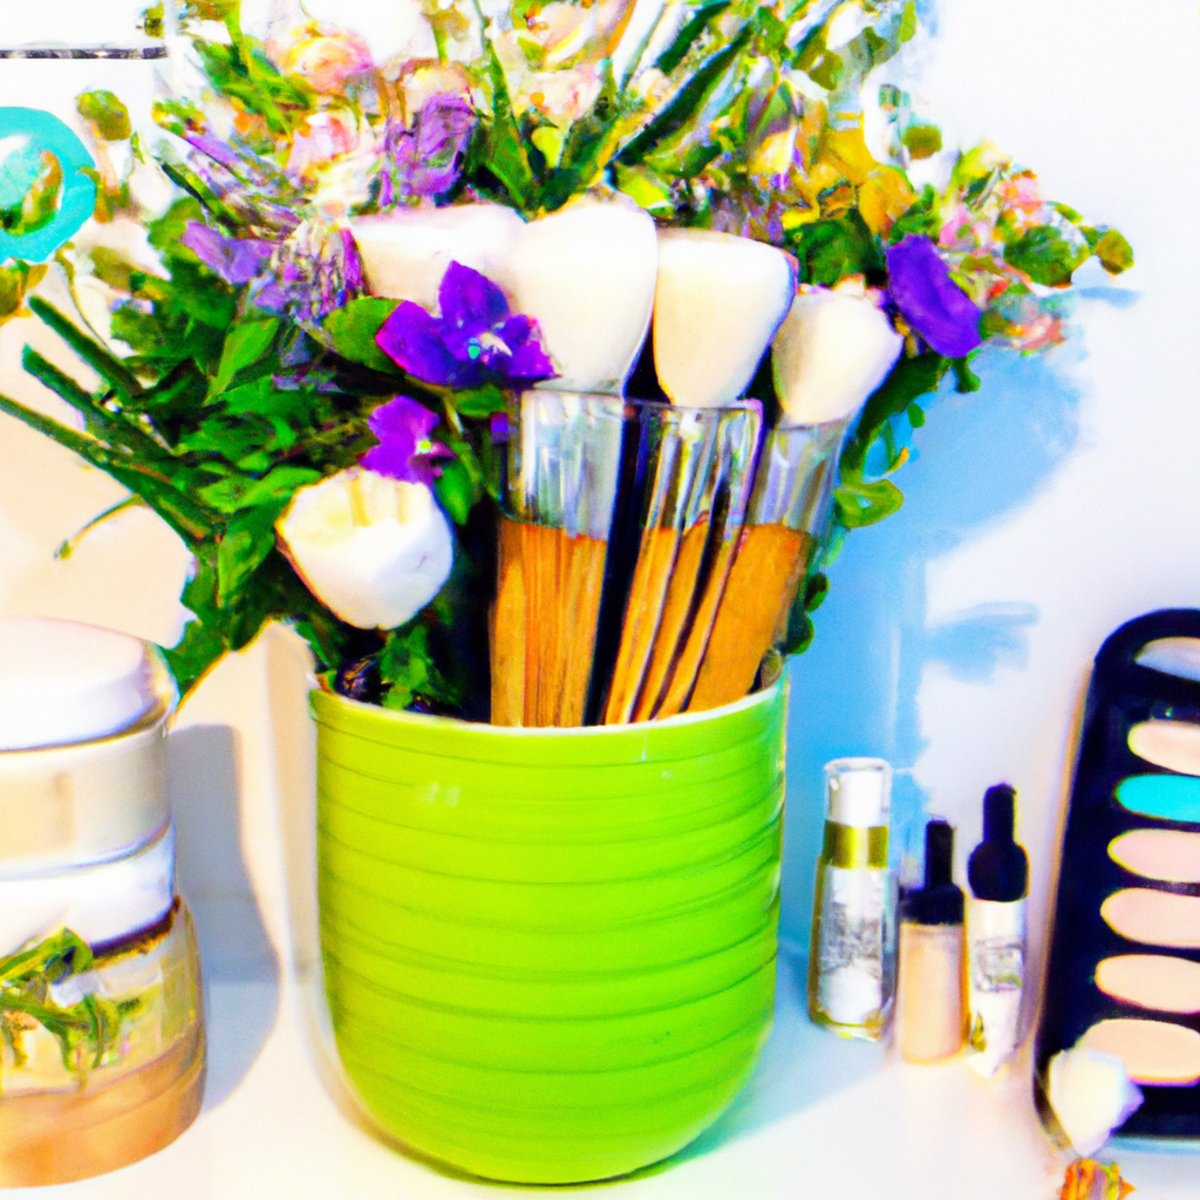 A vibrant bouquet of flowers, eco-friendly beauty tools, and homemade skincare products promote sustainable beauty practices.